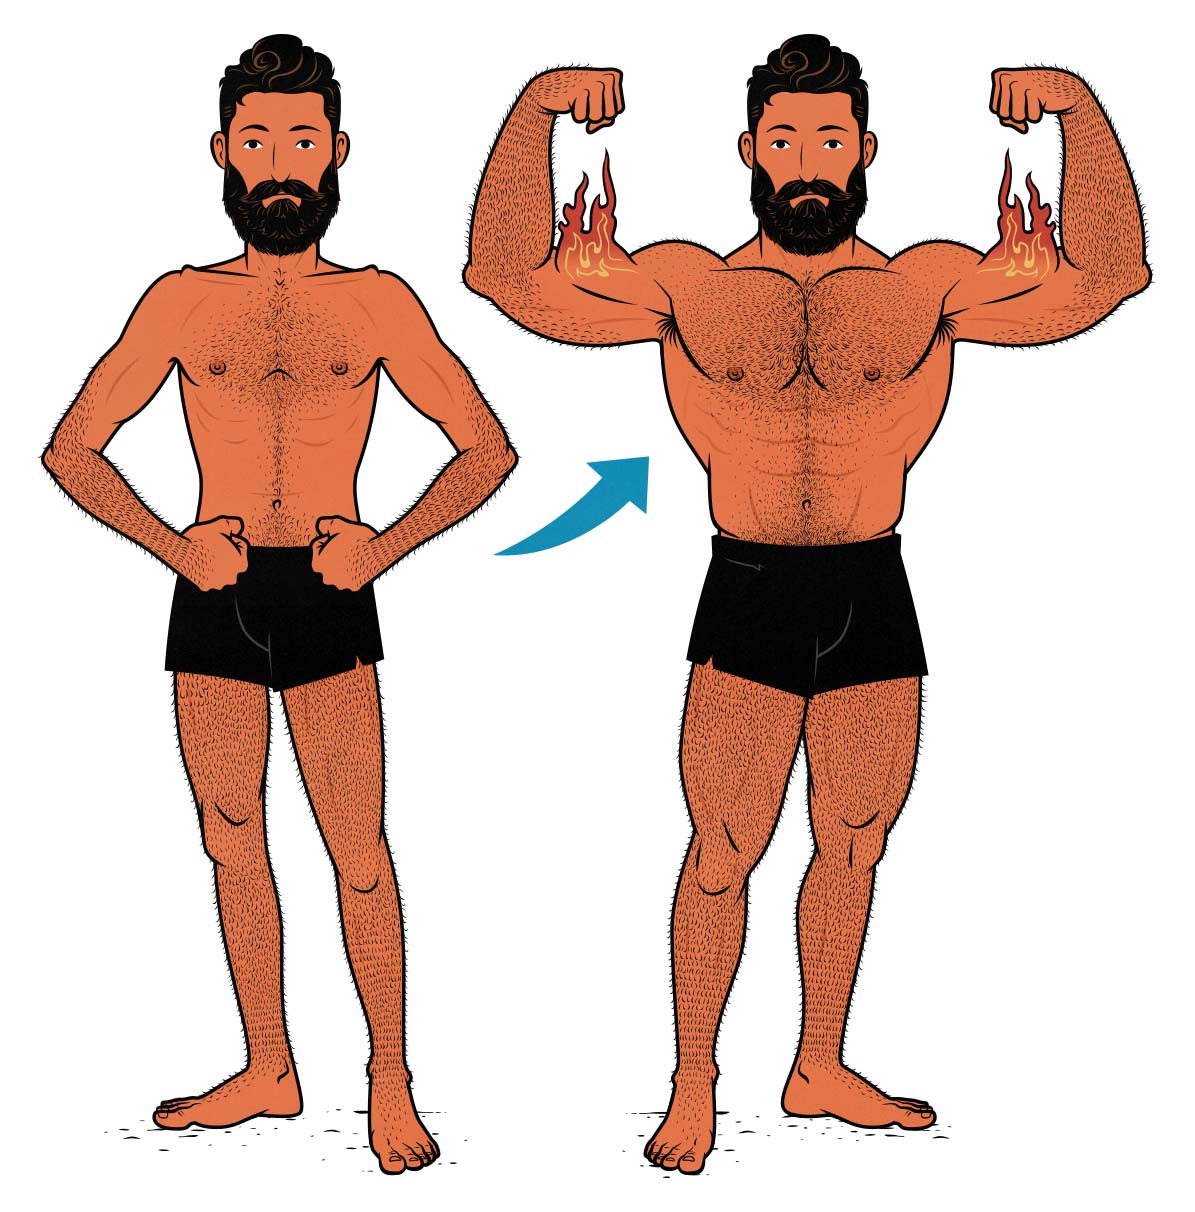 A skinny guy building muscle. Illustrated by Shane Duquette for Outlift.